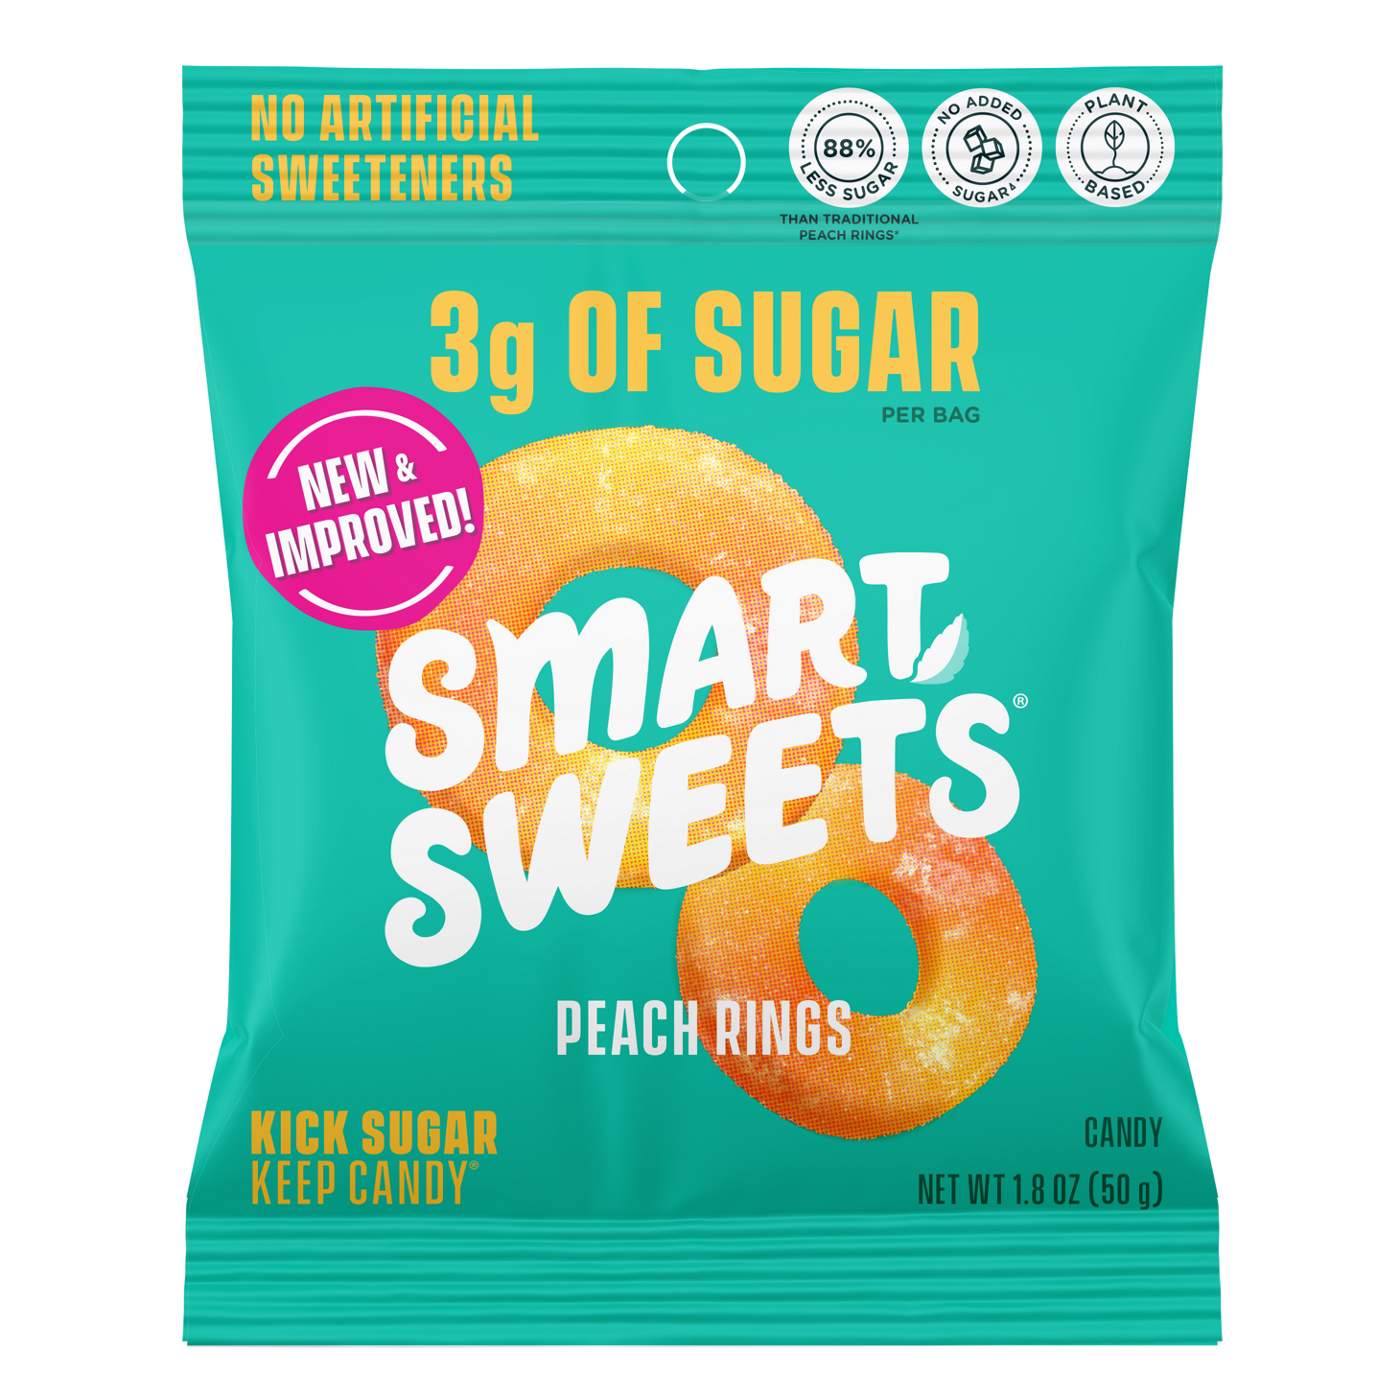 SmartSweets Peach Rings Candy; image 1 of 2